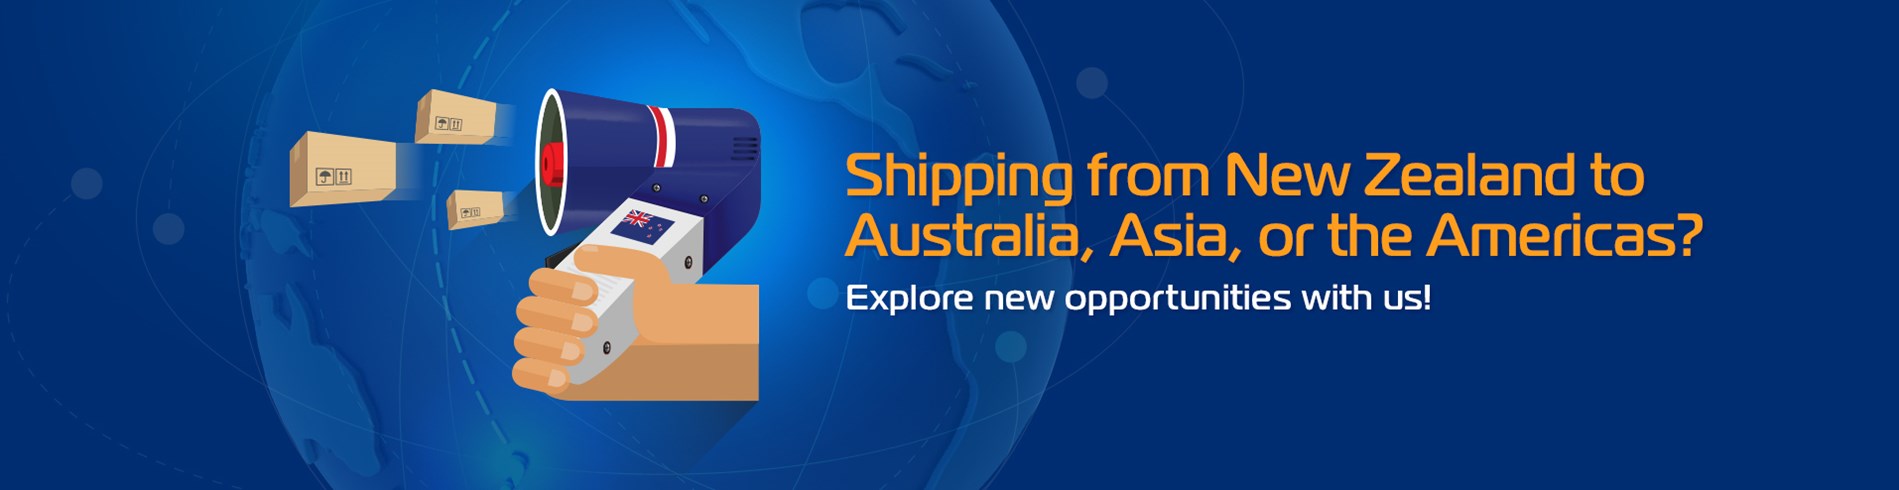 Shipping from New Zealand to Australia, Asia or the Americas?